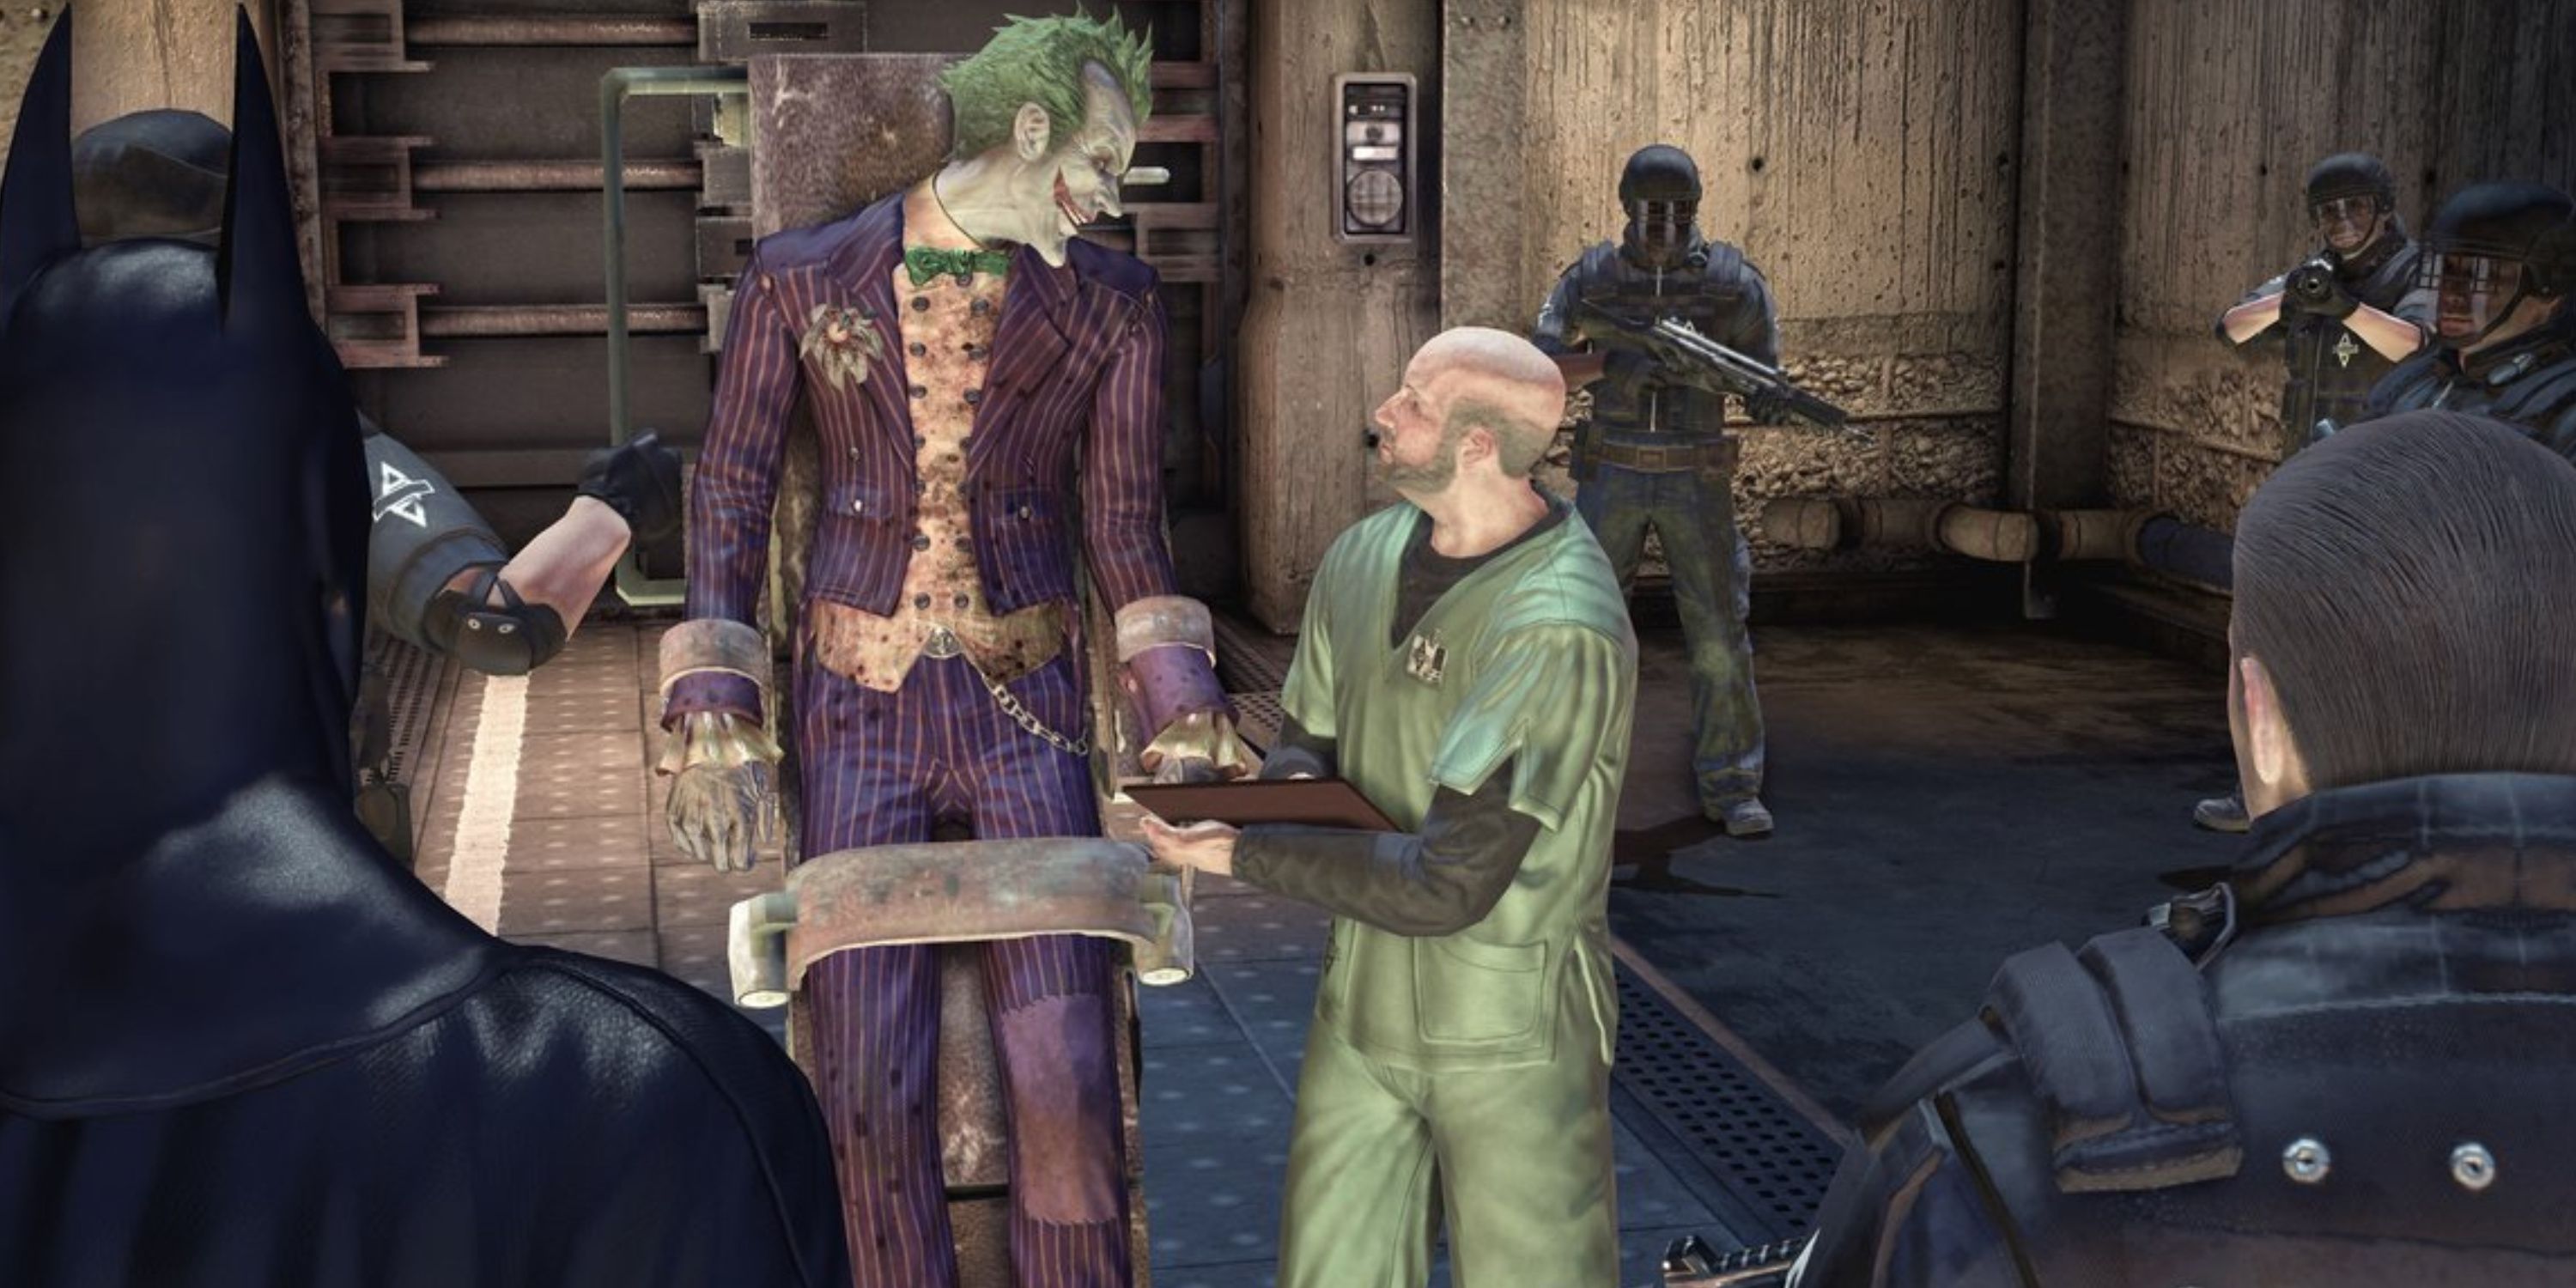 Joker strapped talking to Arkham Asylum worker as Batman and watches